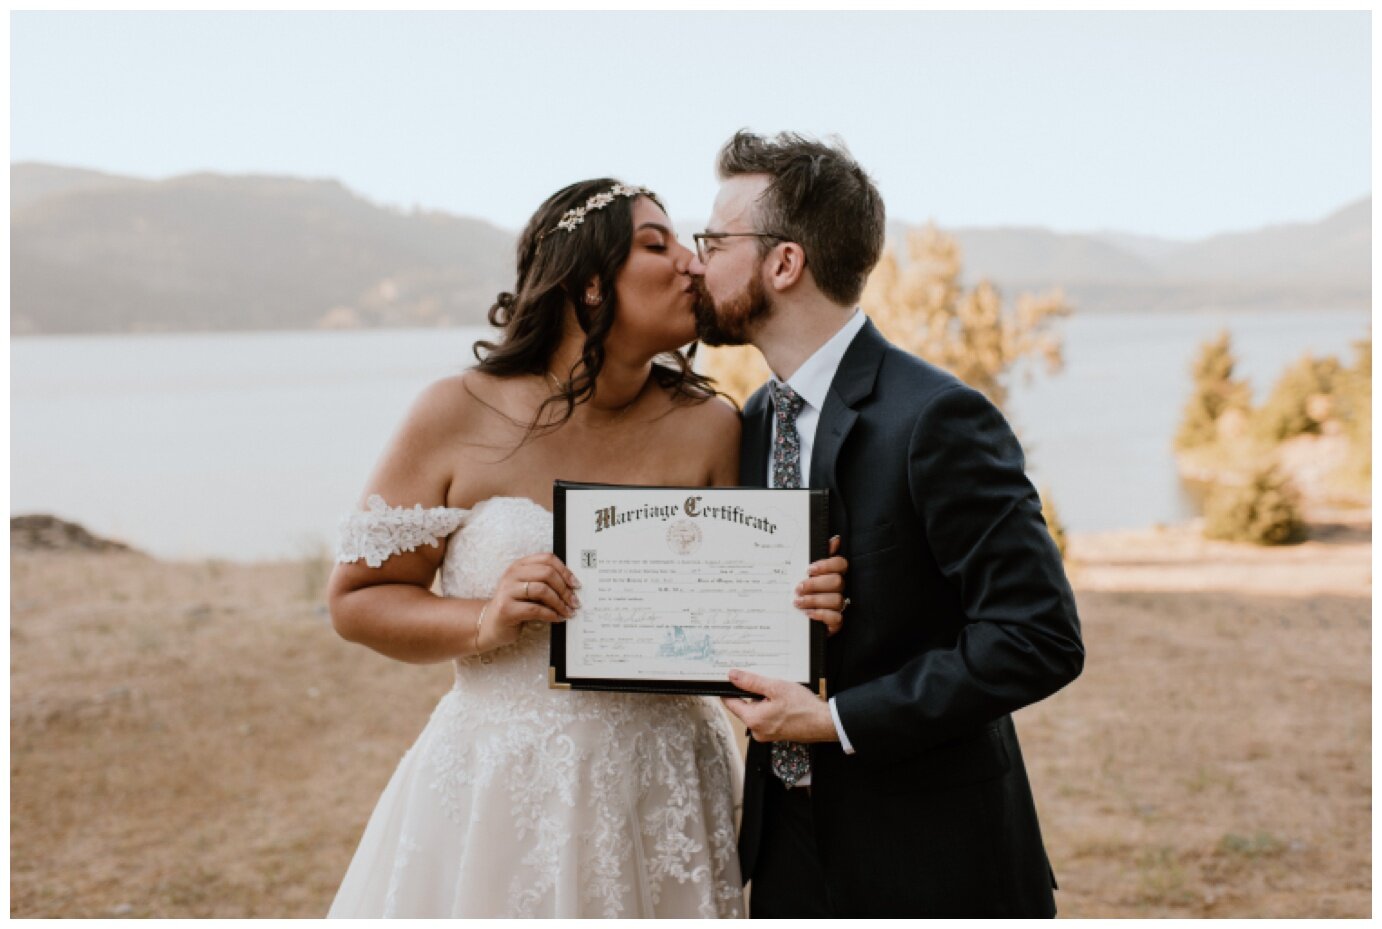 Elopement at Government Cove Peninsula - Madeline Rose Photography - PNW Elopement Photographer_0017.jpg